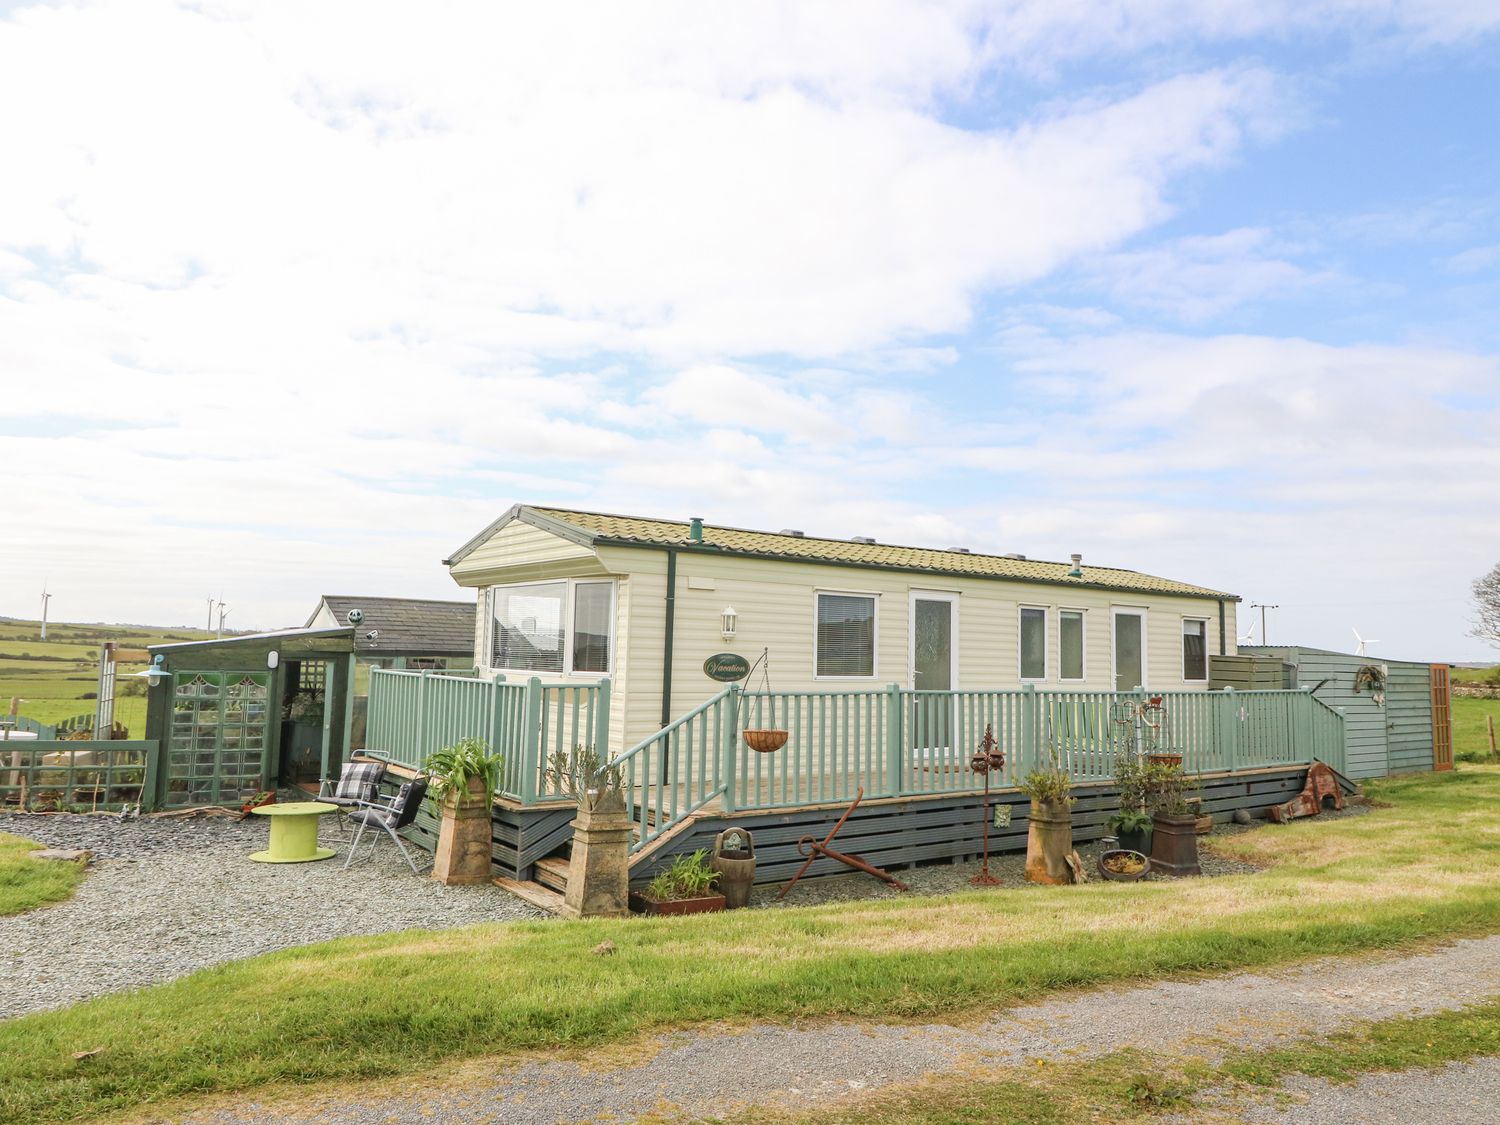 The Caravan @ Lletty'r Wennol - Anglesey - 1155219 - photo 1